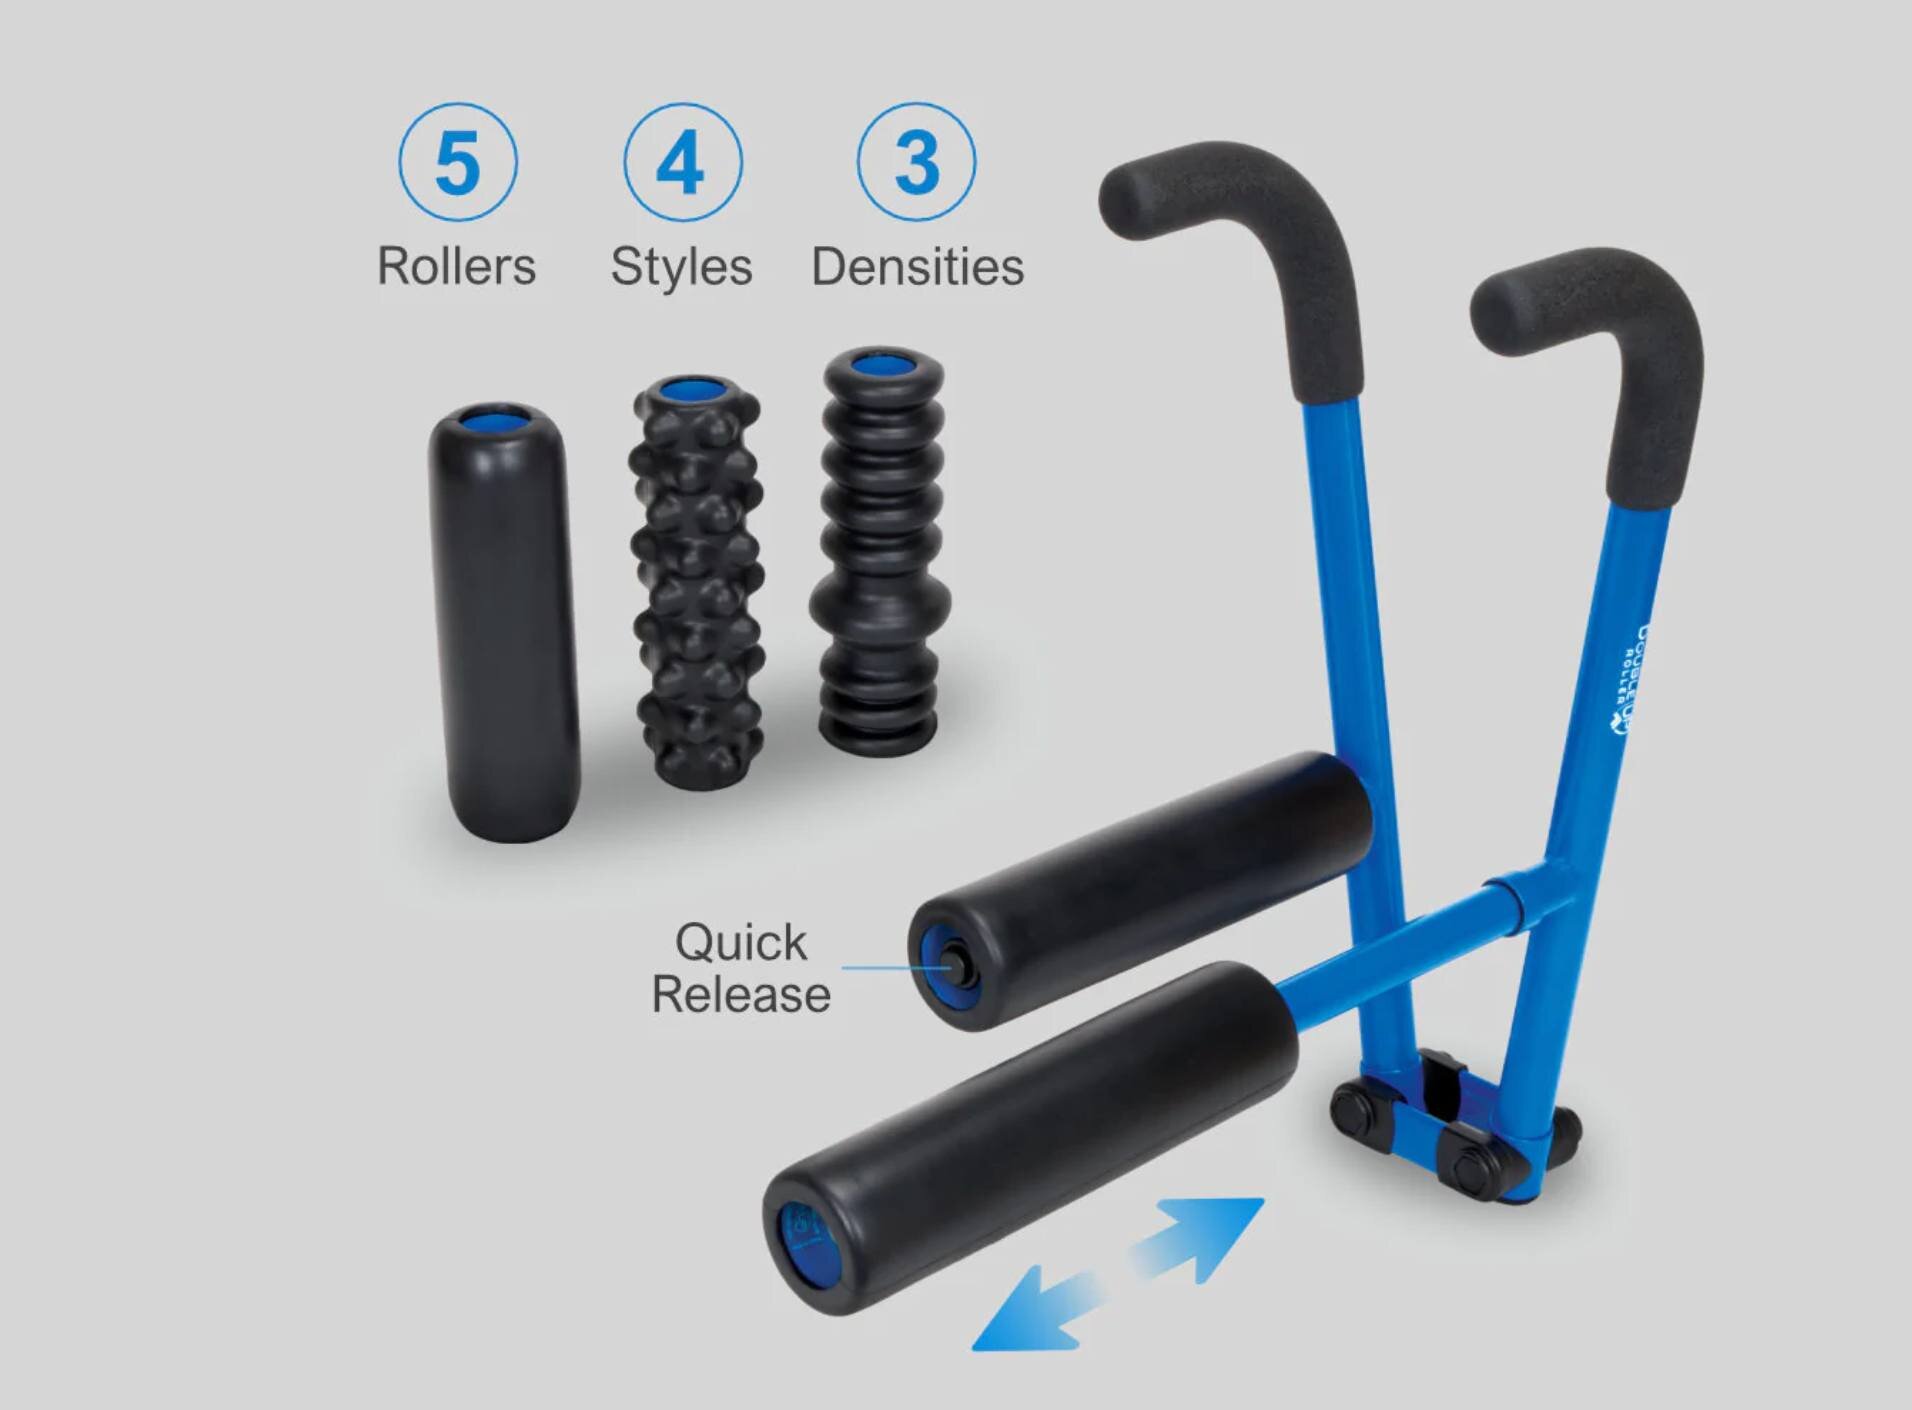 Must Have Recovery Tool in stores now! DoubleUP Roller. 
Kit with multiple heads only $149.95
#thinkChristmaspresent